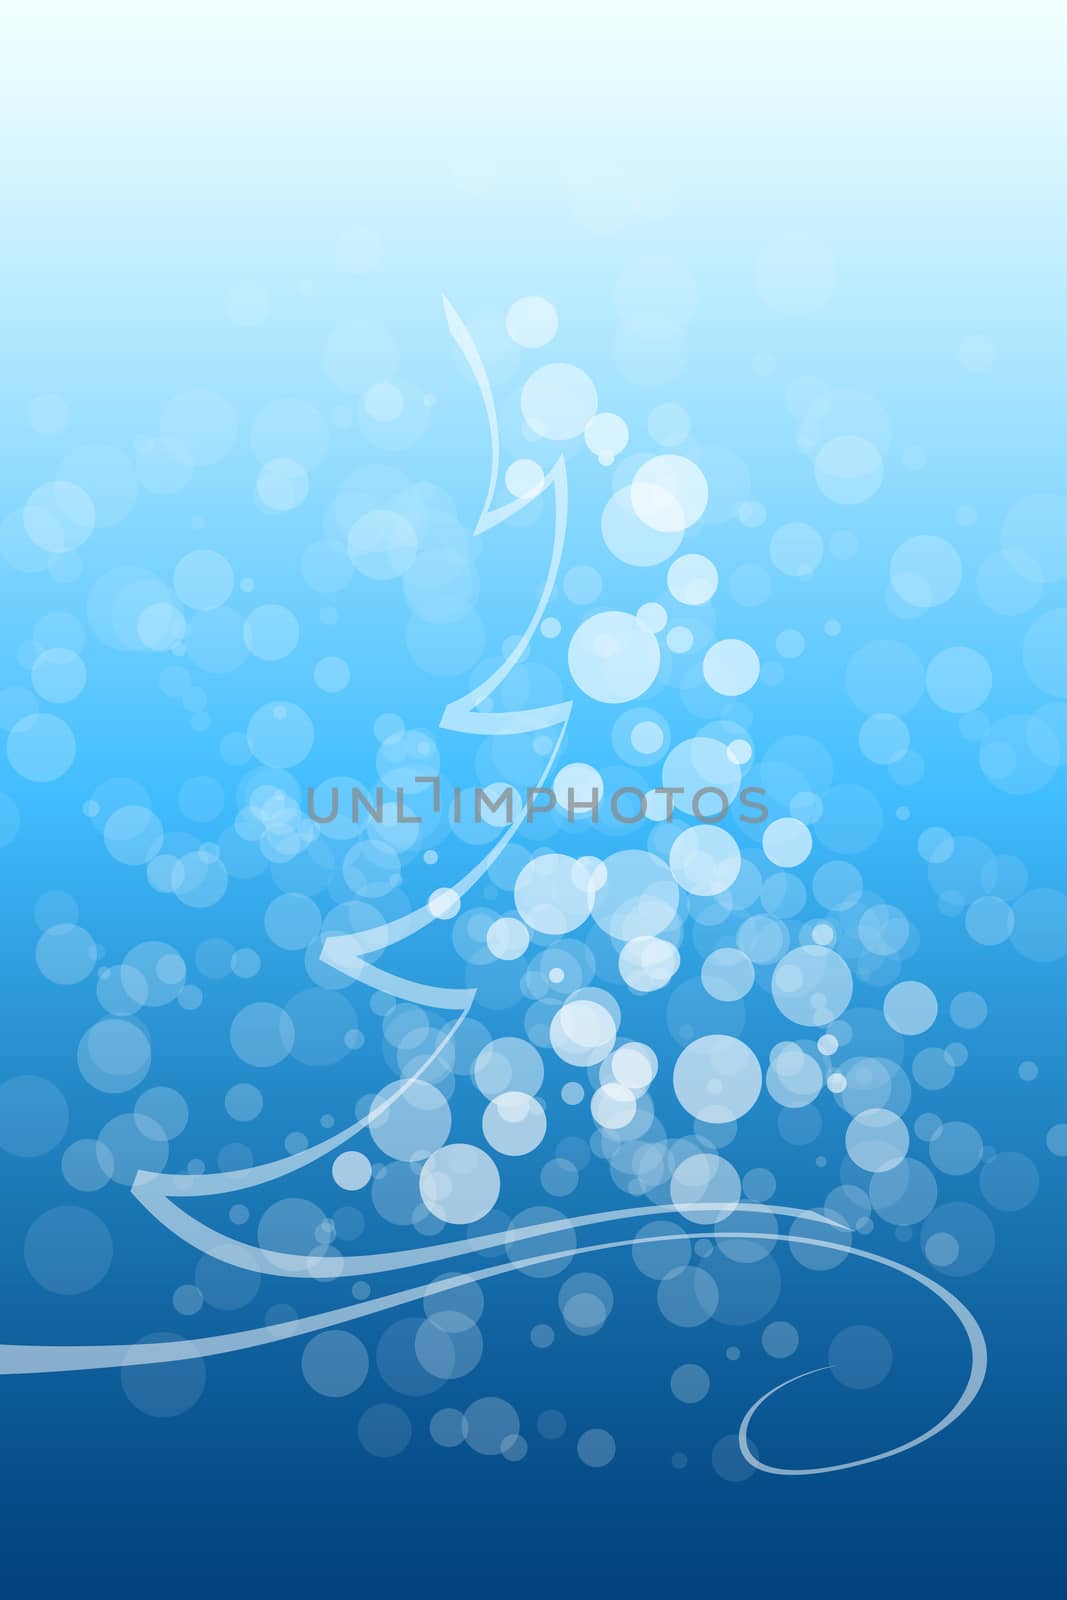 Winter and Christmas background by WaD